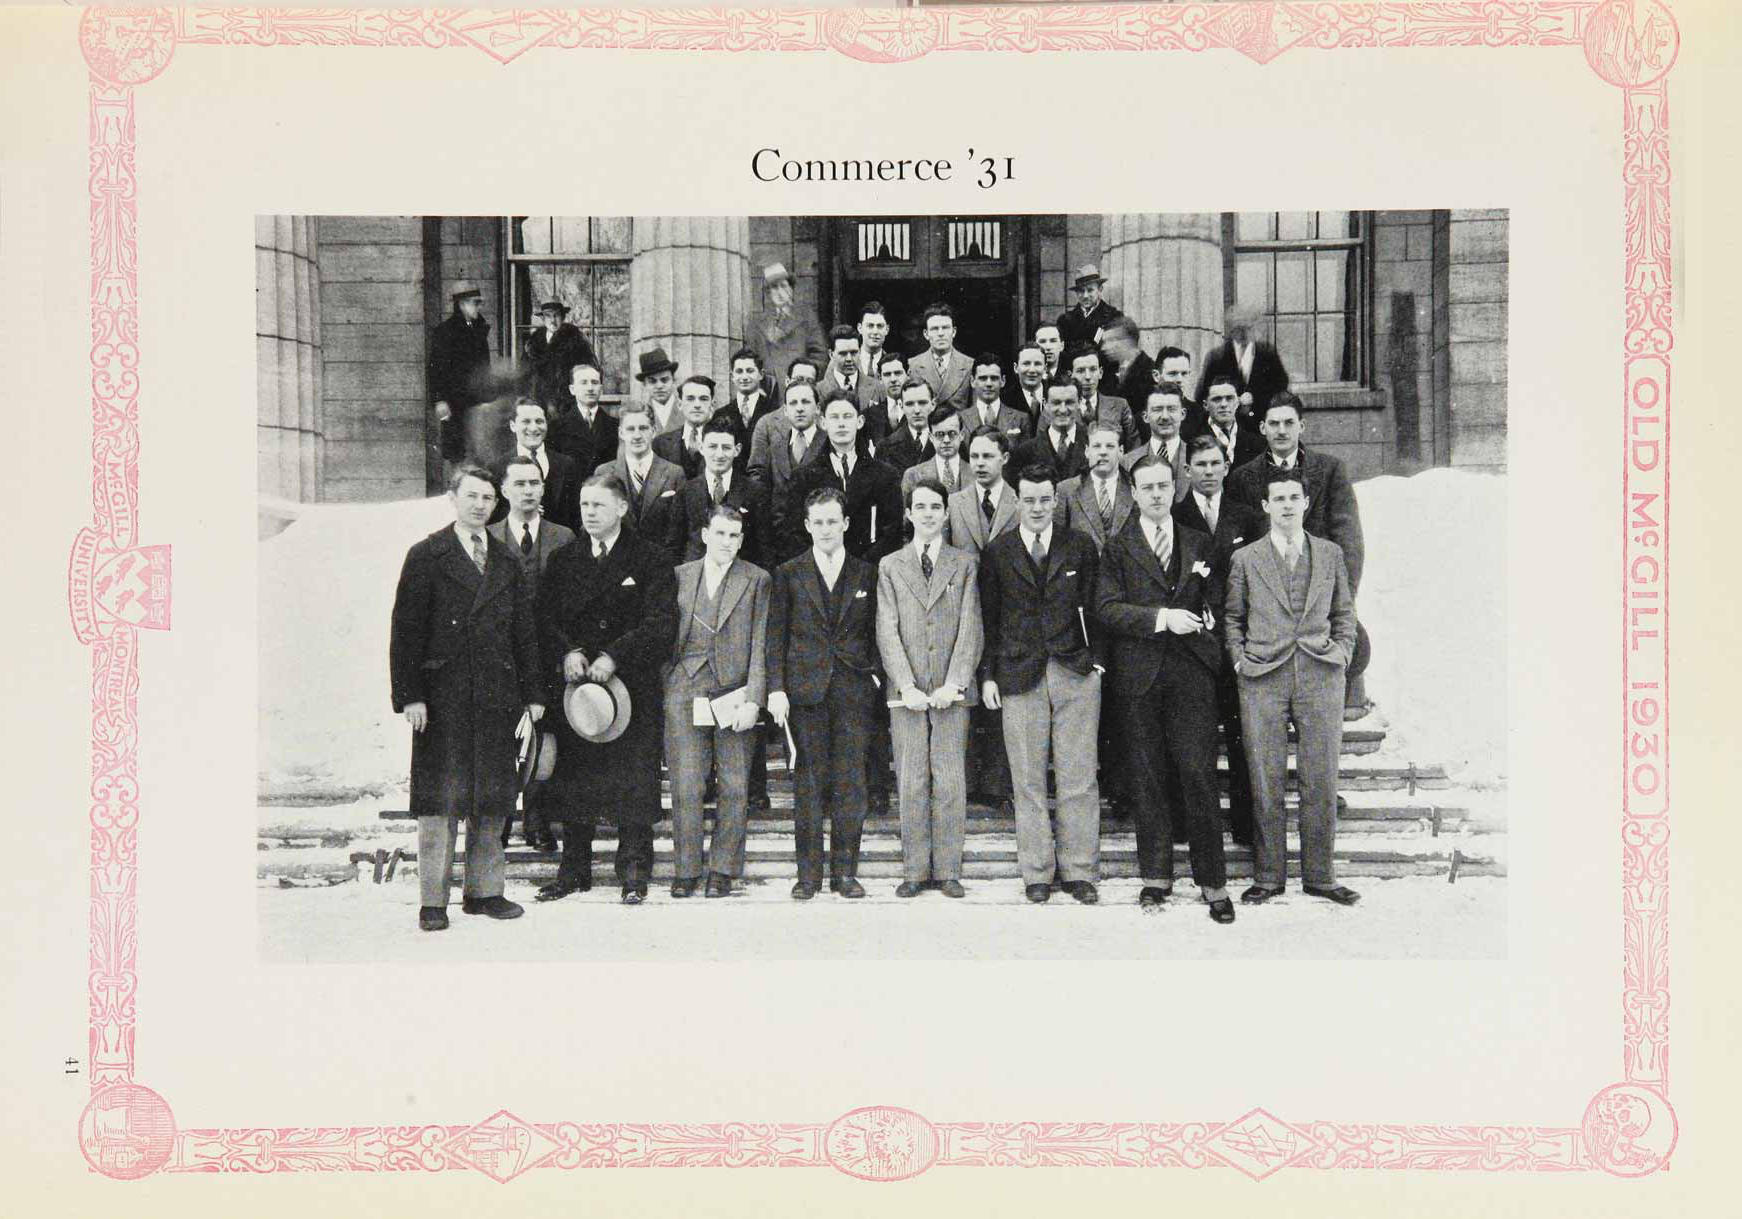 McGill Yearbook: 1930